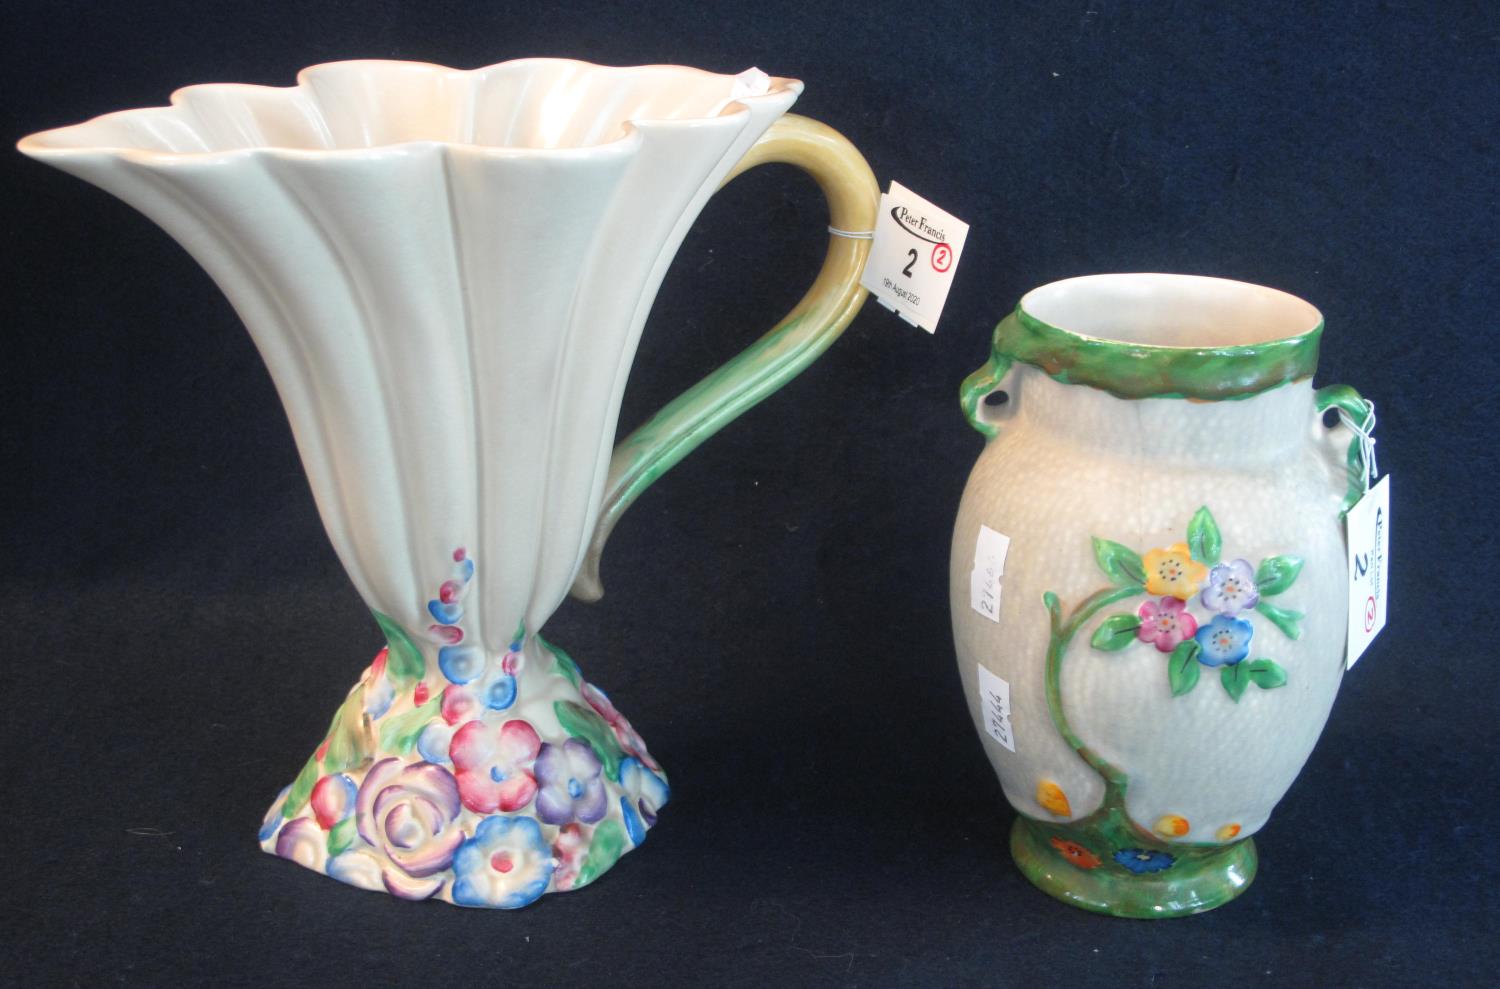 Clarice Cliff 'My Garden' conical and fluted single handled jug, shape no. 830. Together with a